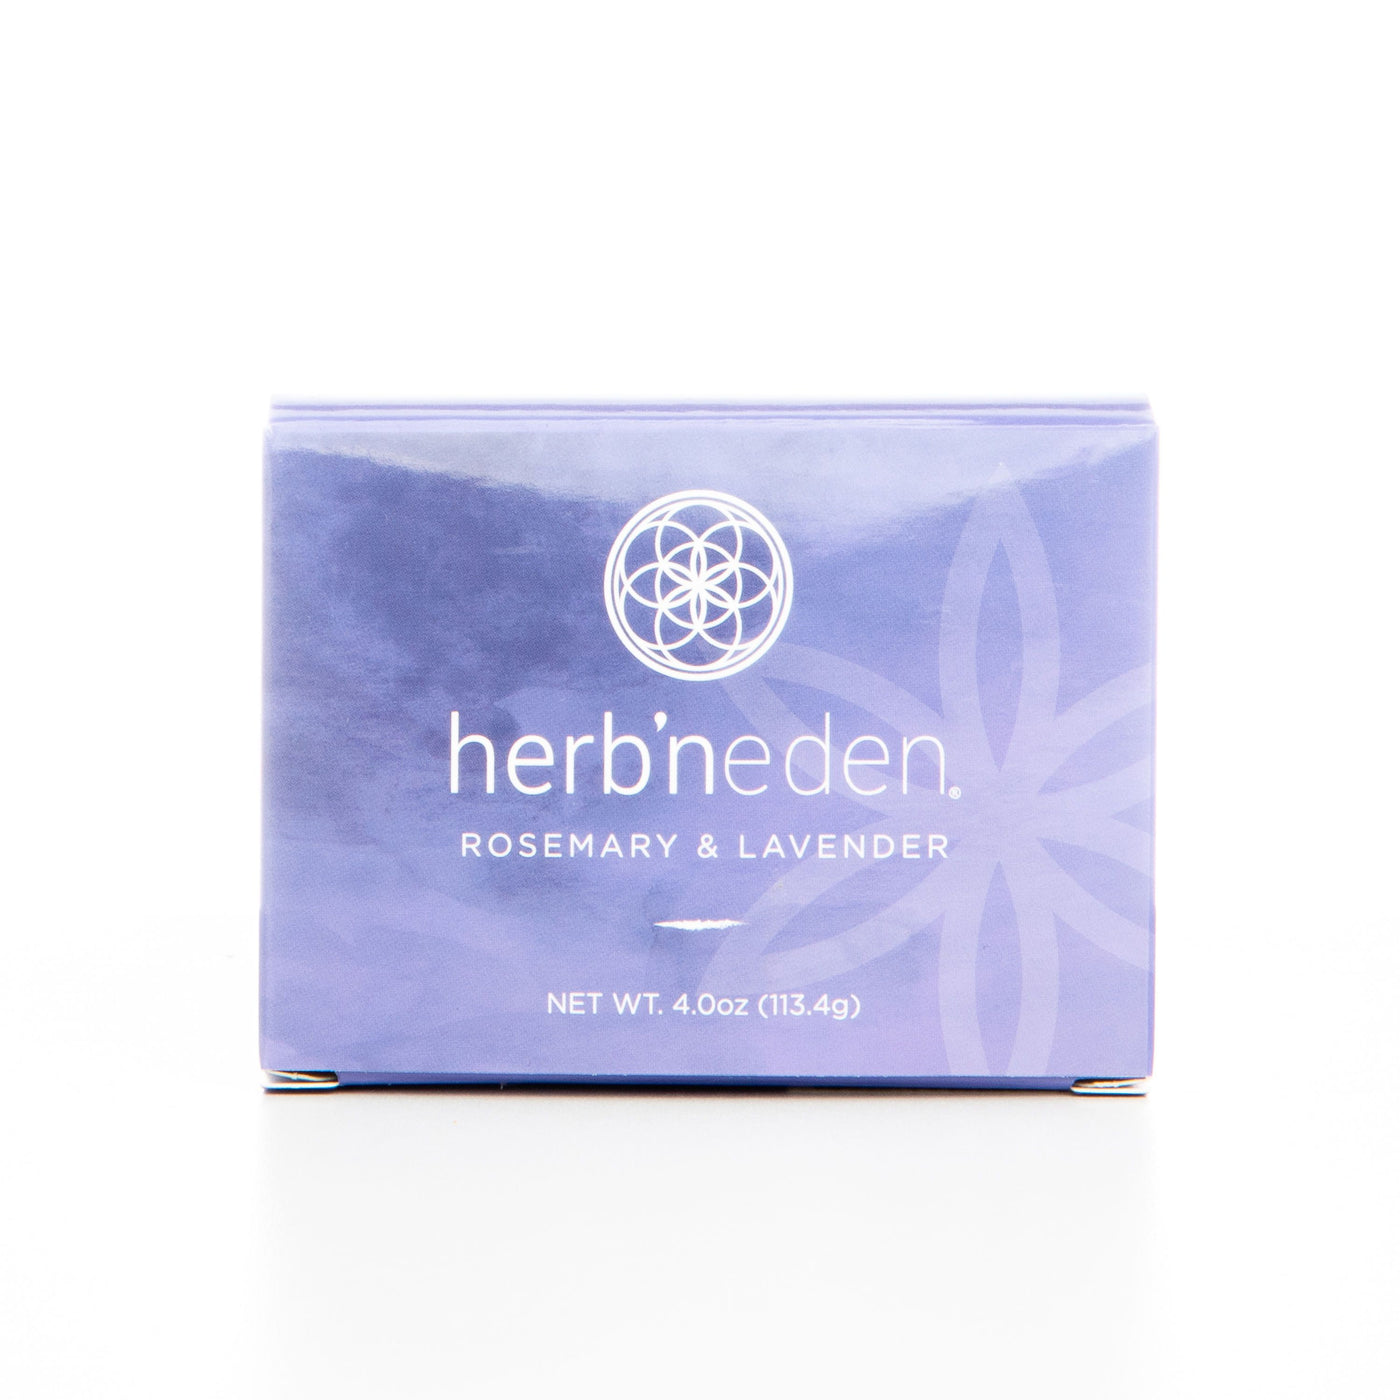 Rosemary & Lavender (included in the bundle)